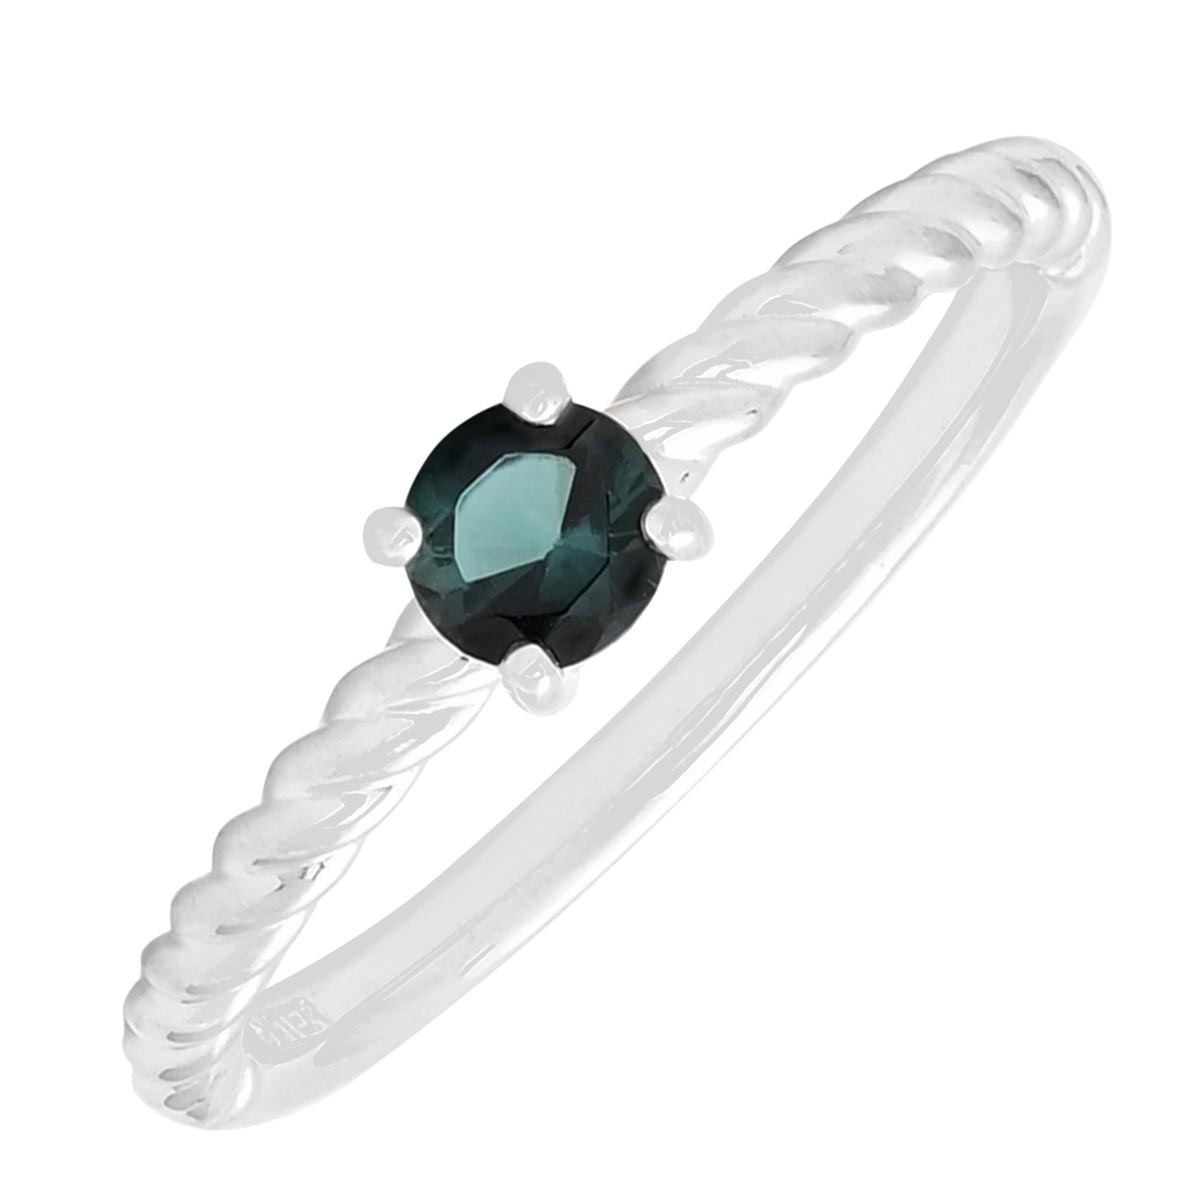 Maine Indicolite Tourmaline Ring in Sterling Silver